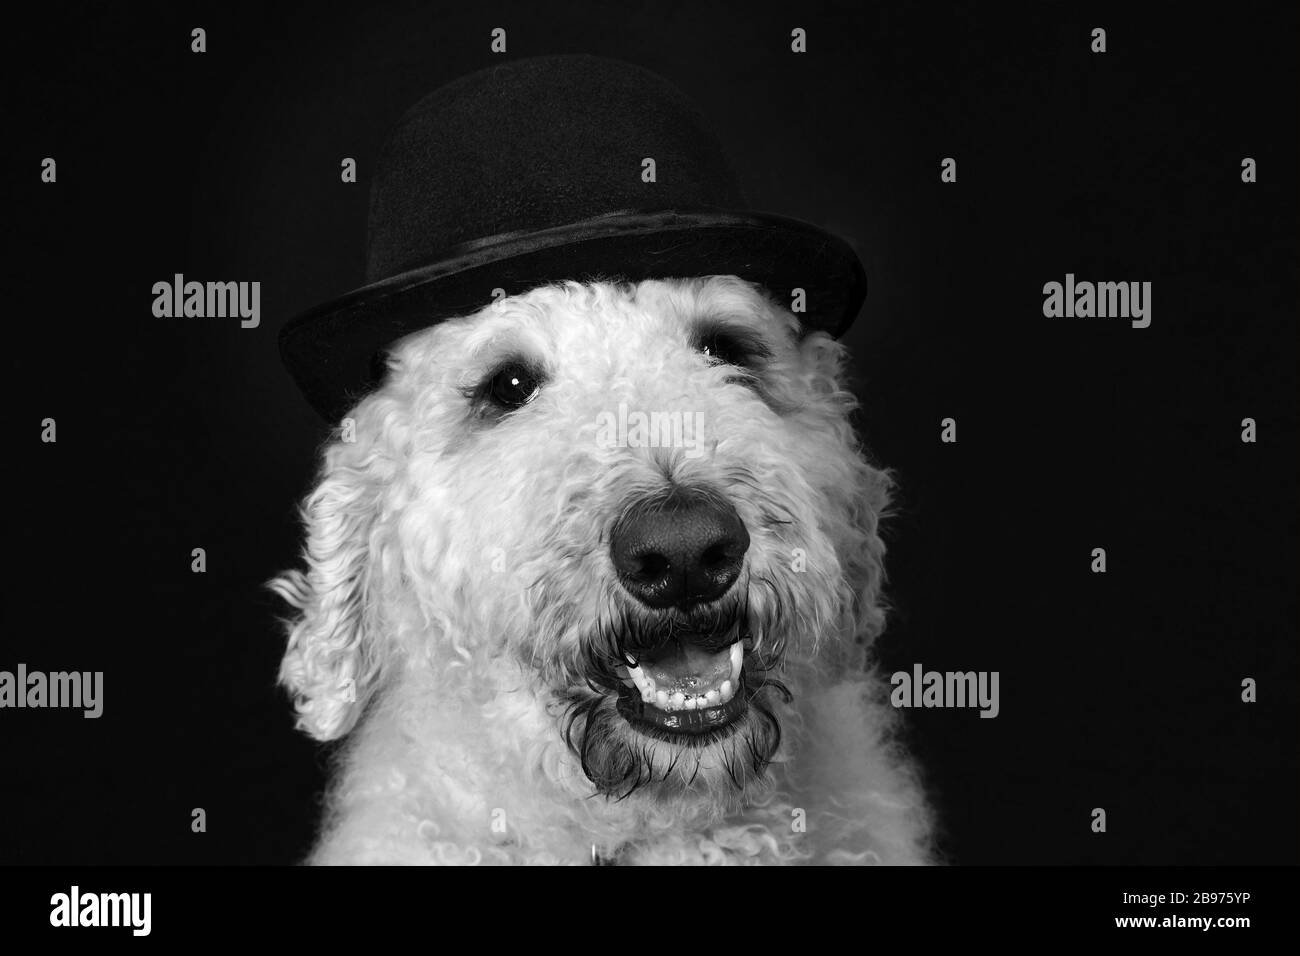 Cute goldendoodle dog with bowler hat portrait B&W Stock Photo